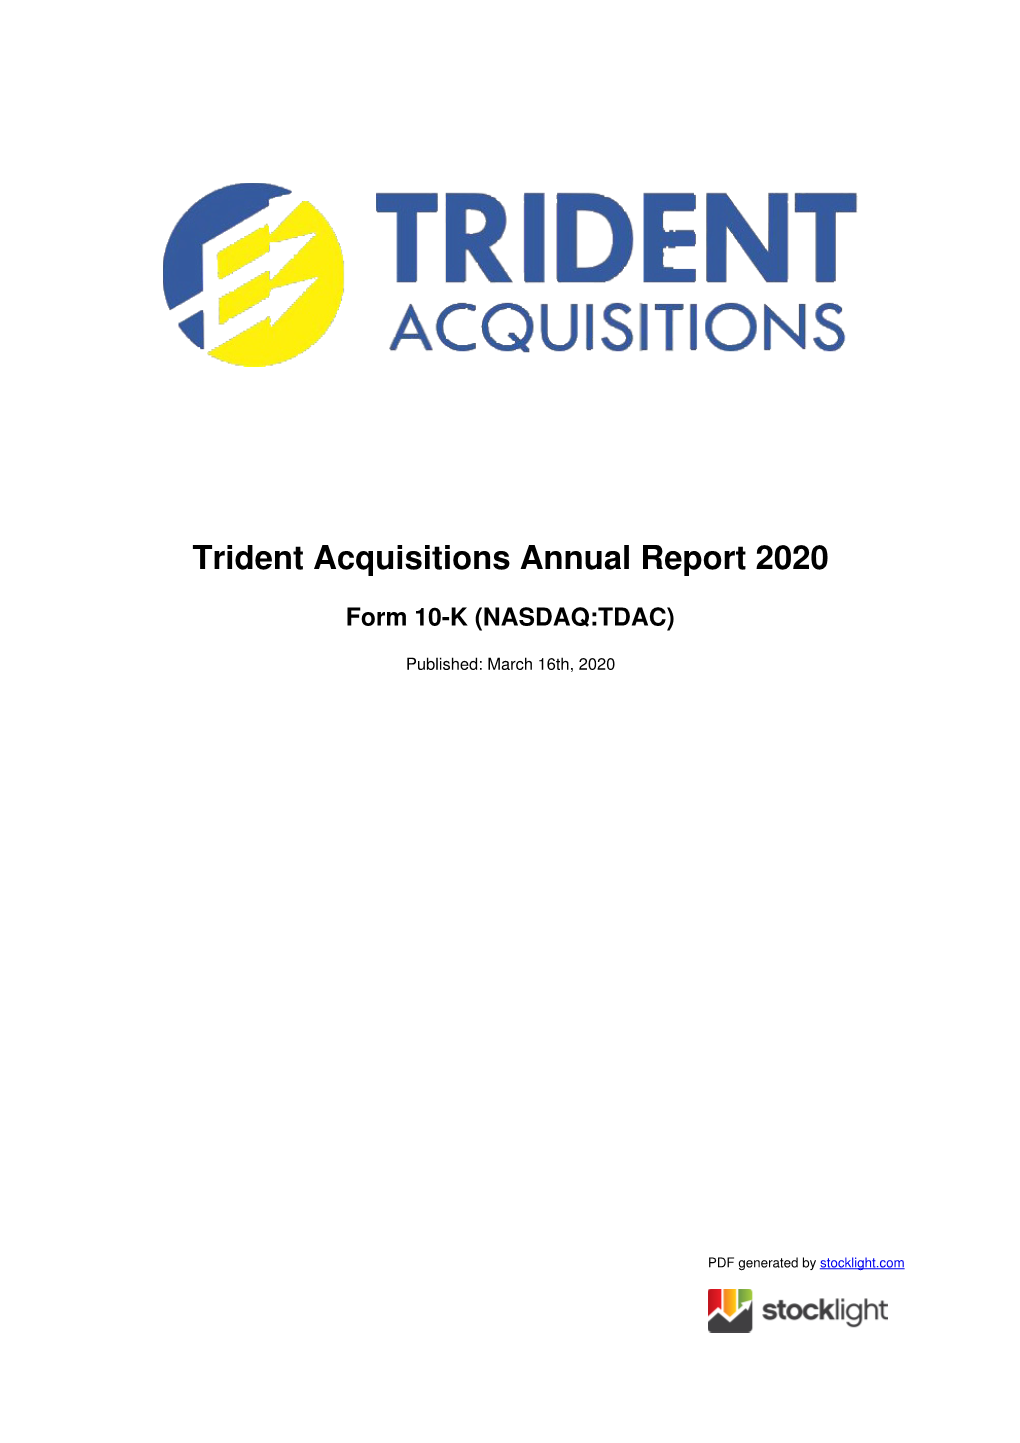 Trident Acquisitions Annual Report 2020